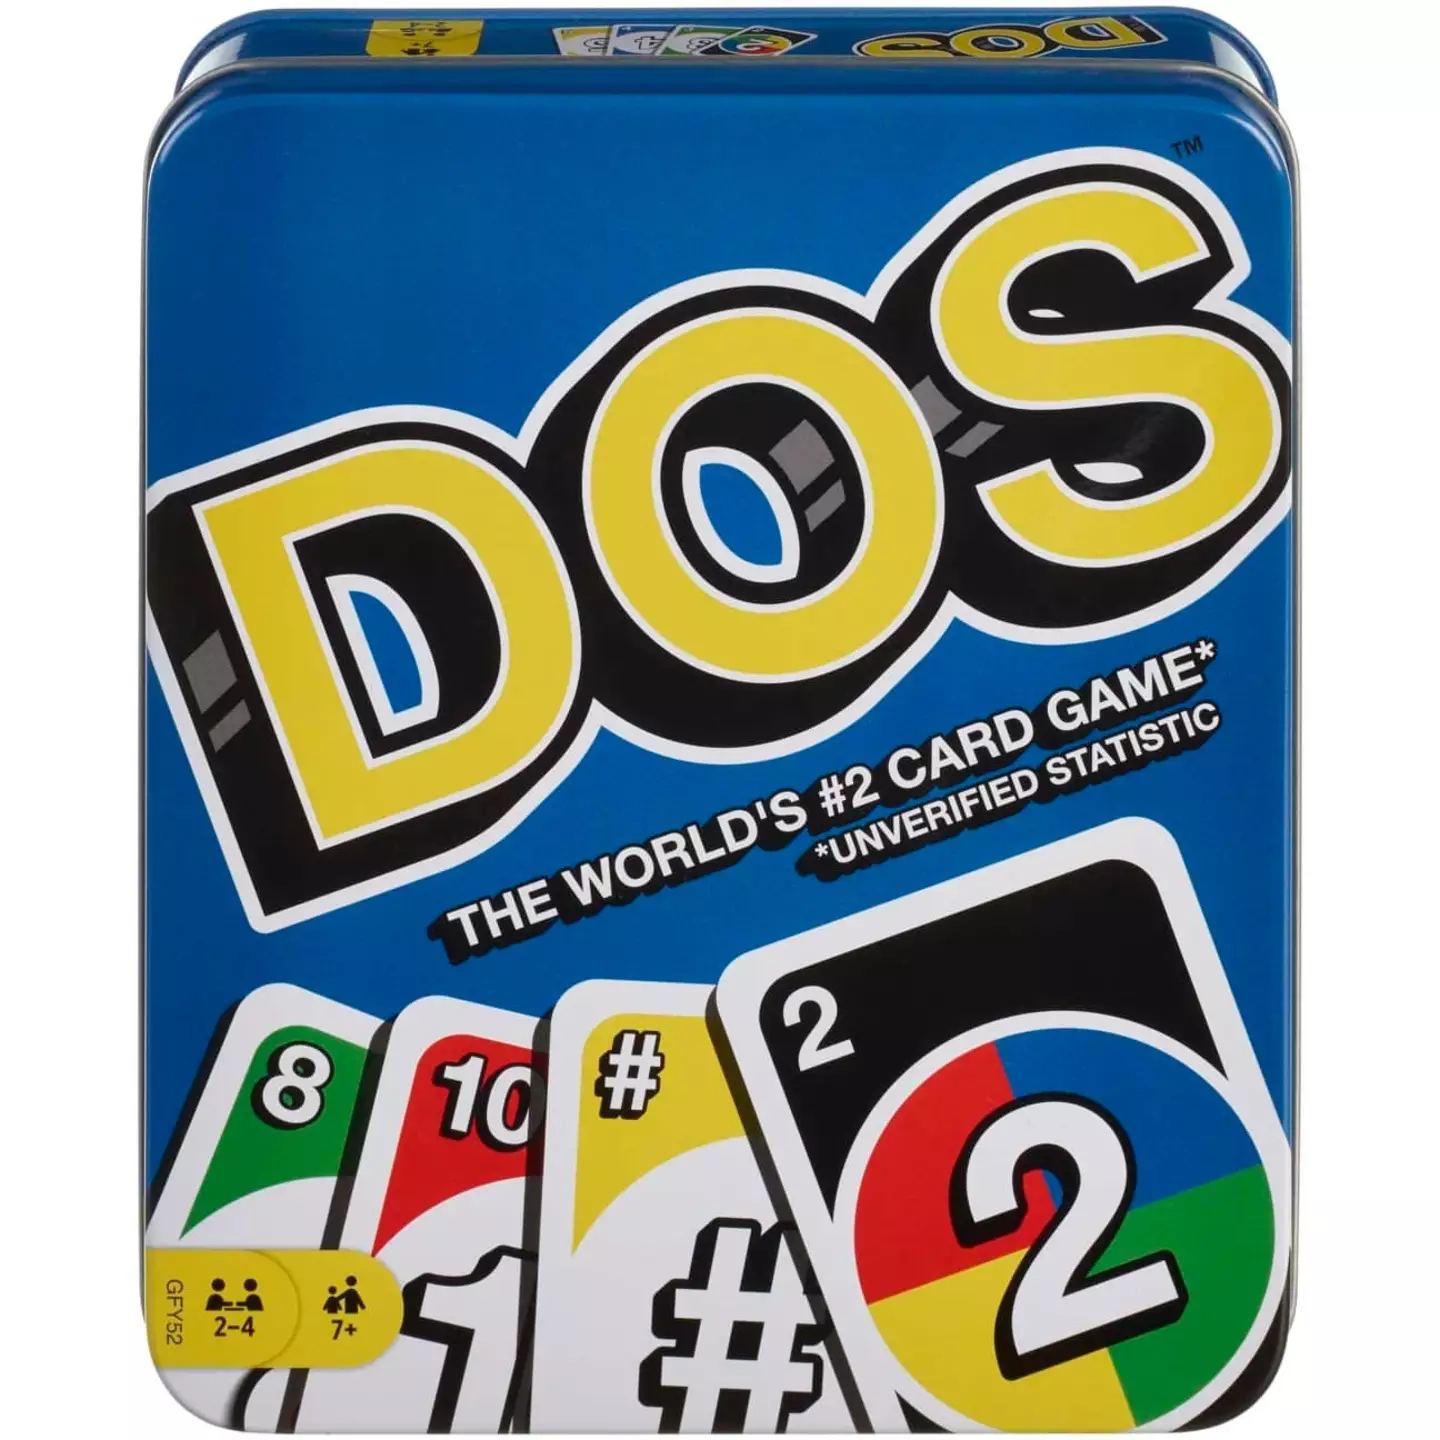 Dos is the follow-up to Uno.